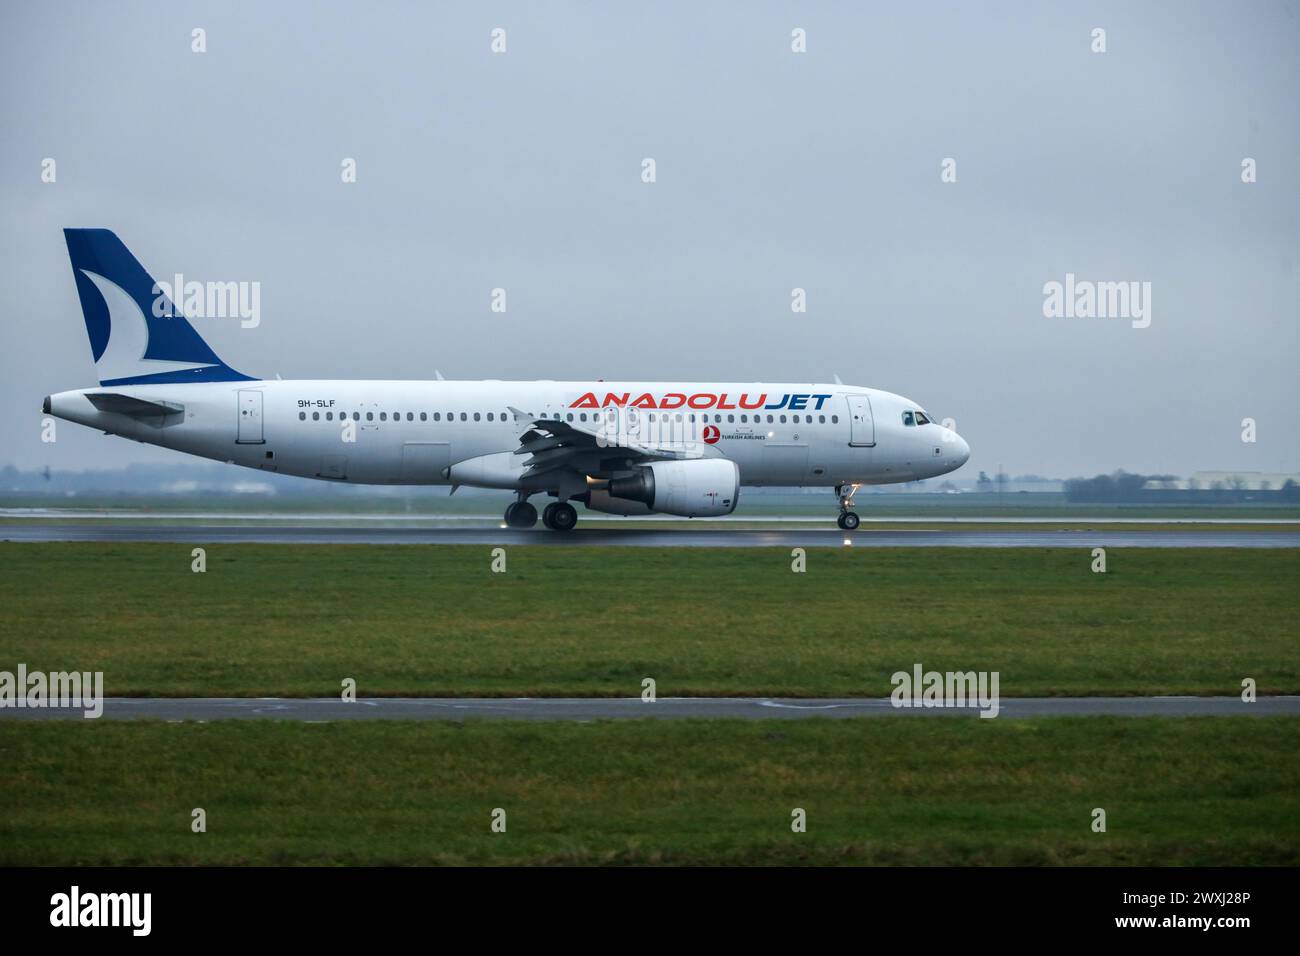 9H-SLF AnadoluJet Airbus A320-214 aircraft makes a landing on Polderbaan upon arrival at Amsterdam Schiphol airport Netherlands Stock Photo